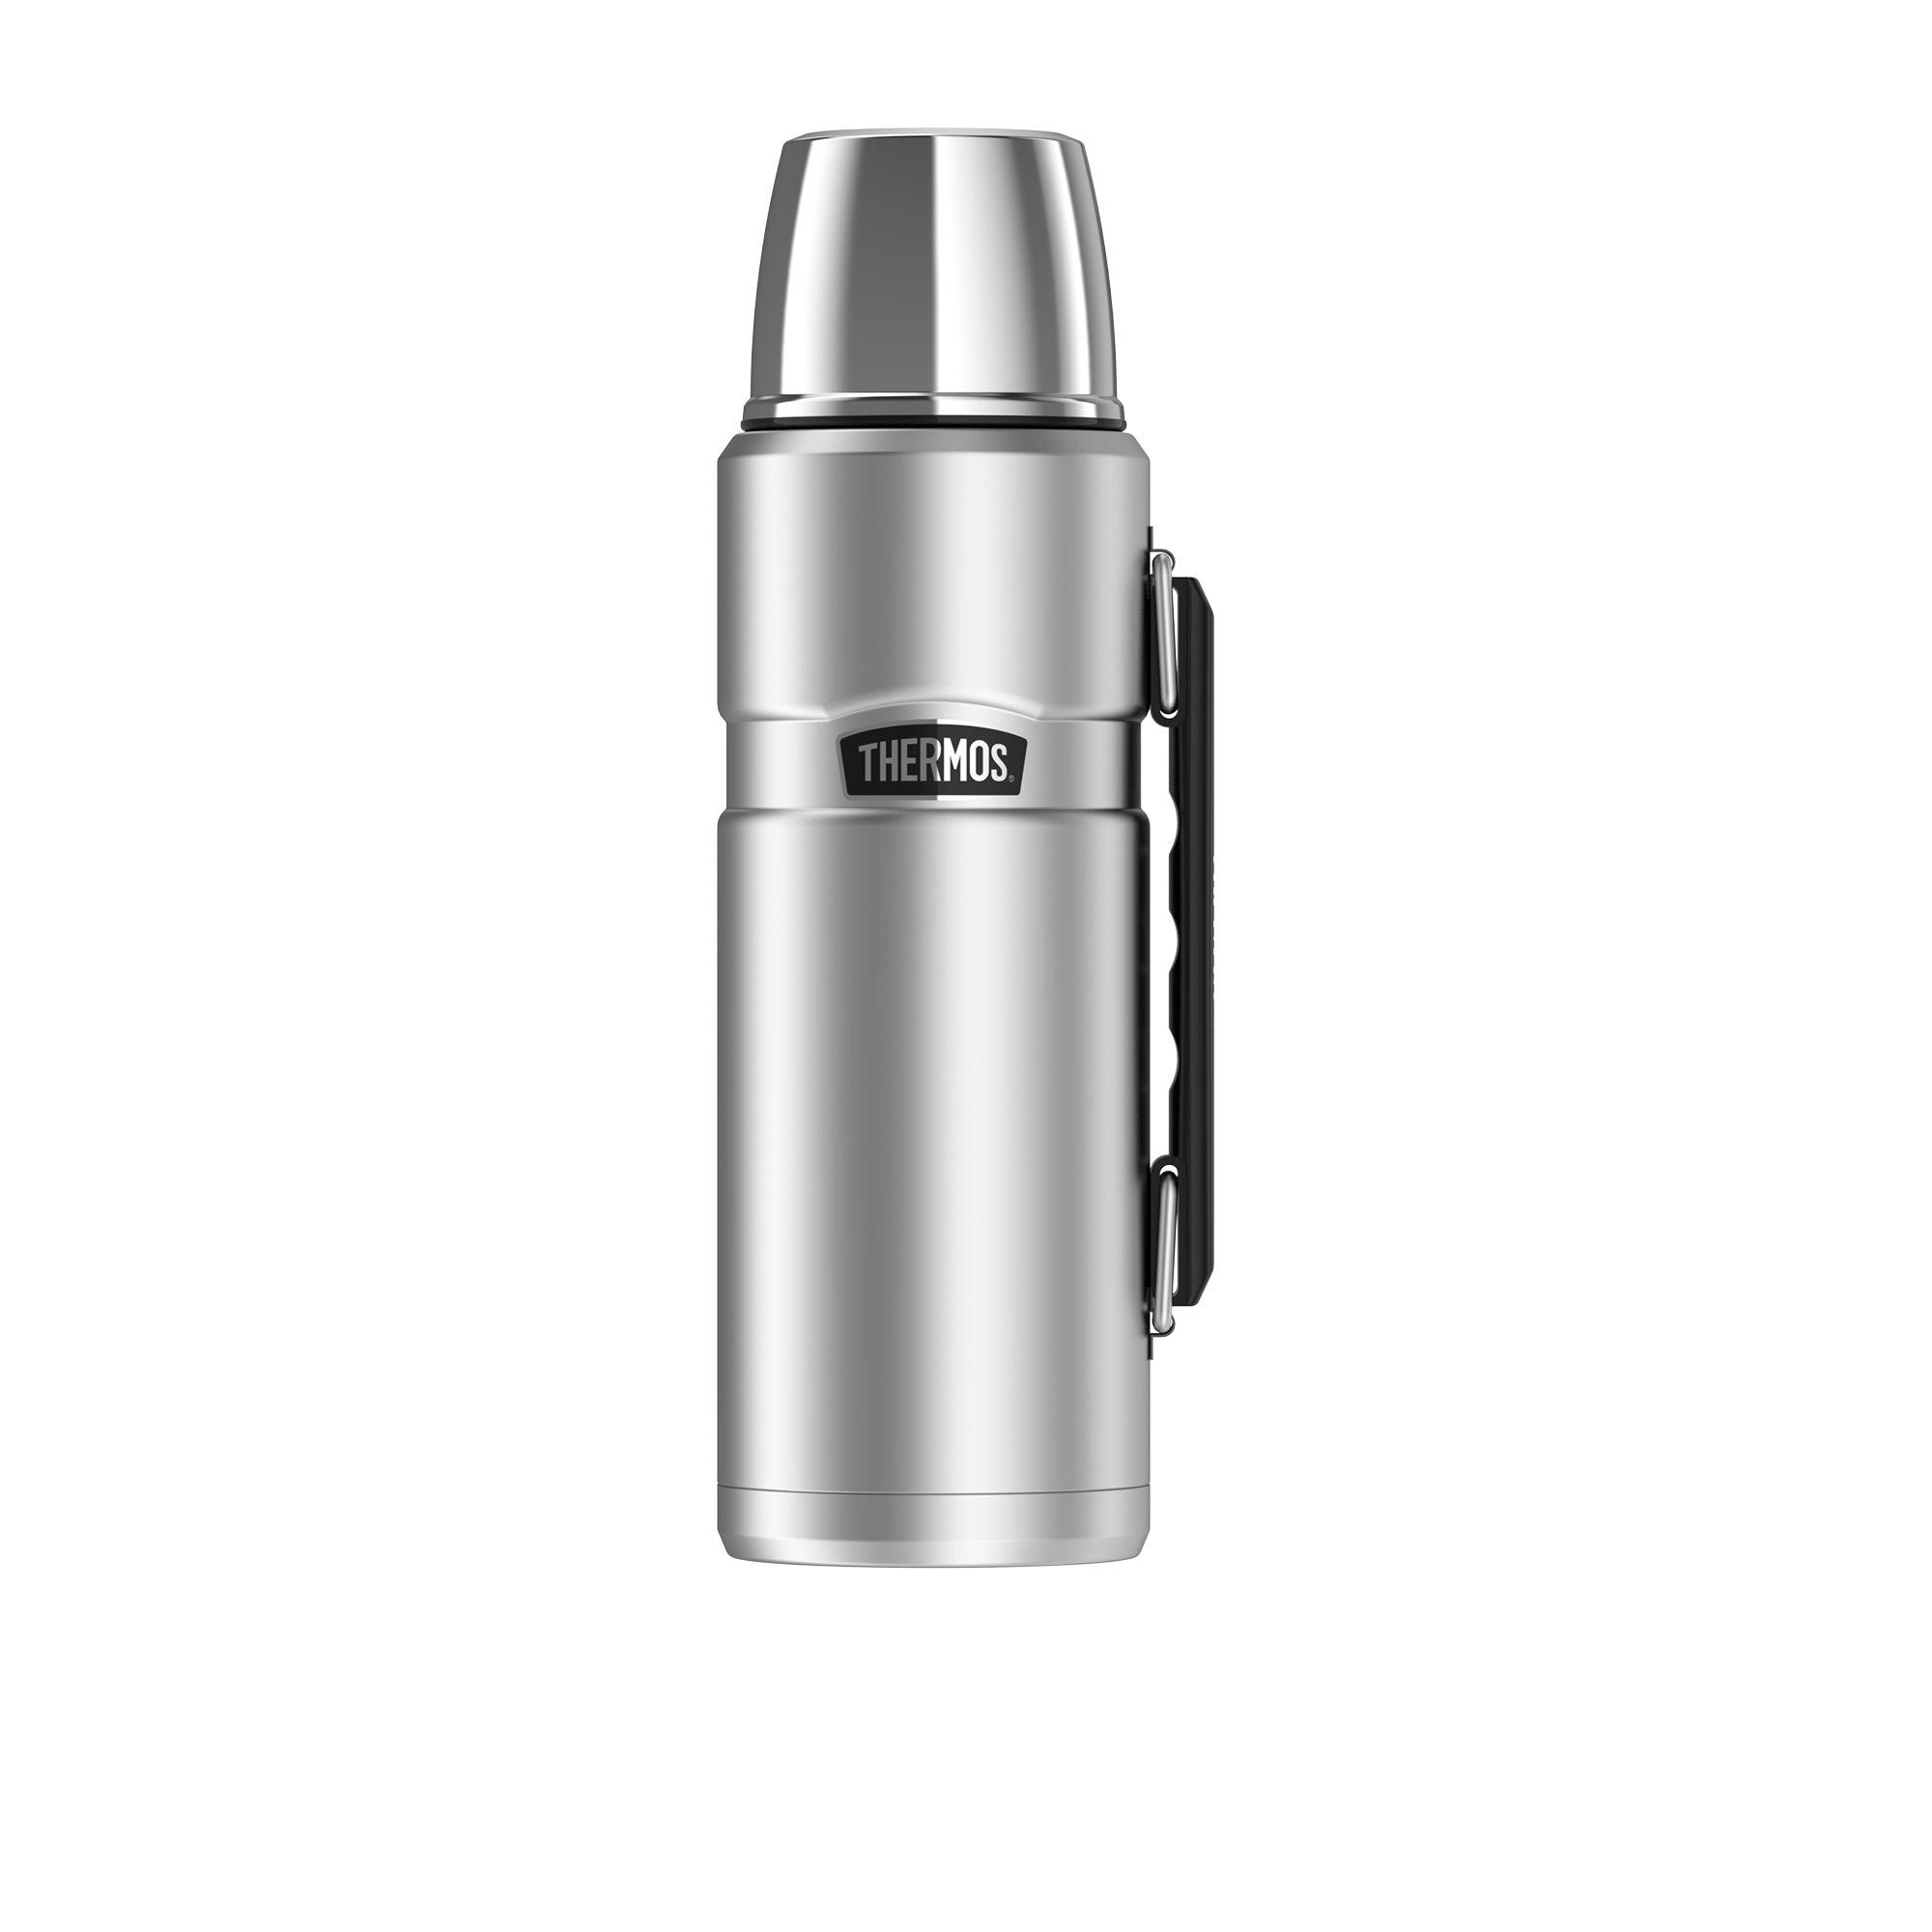 Thermos Stainless King Insulated Flask 1.2L Stainless Steel Image 1